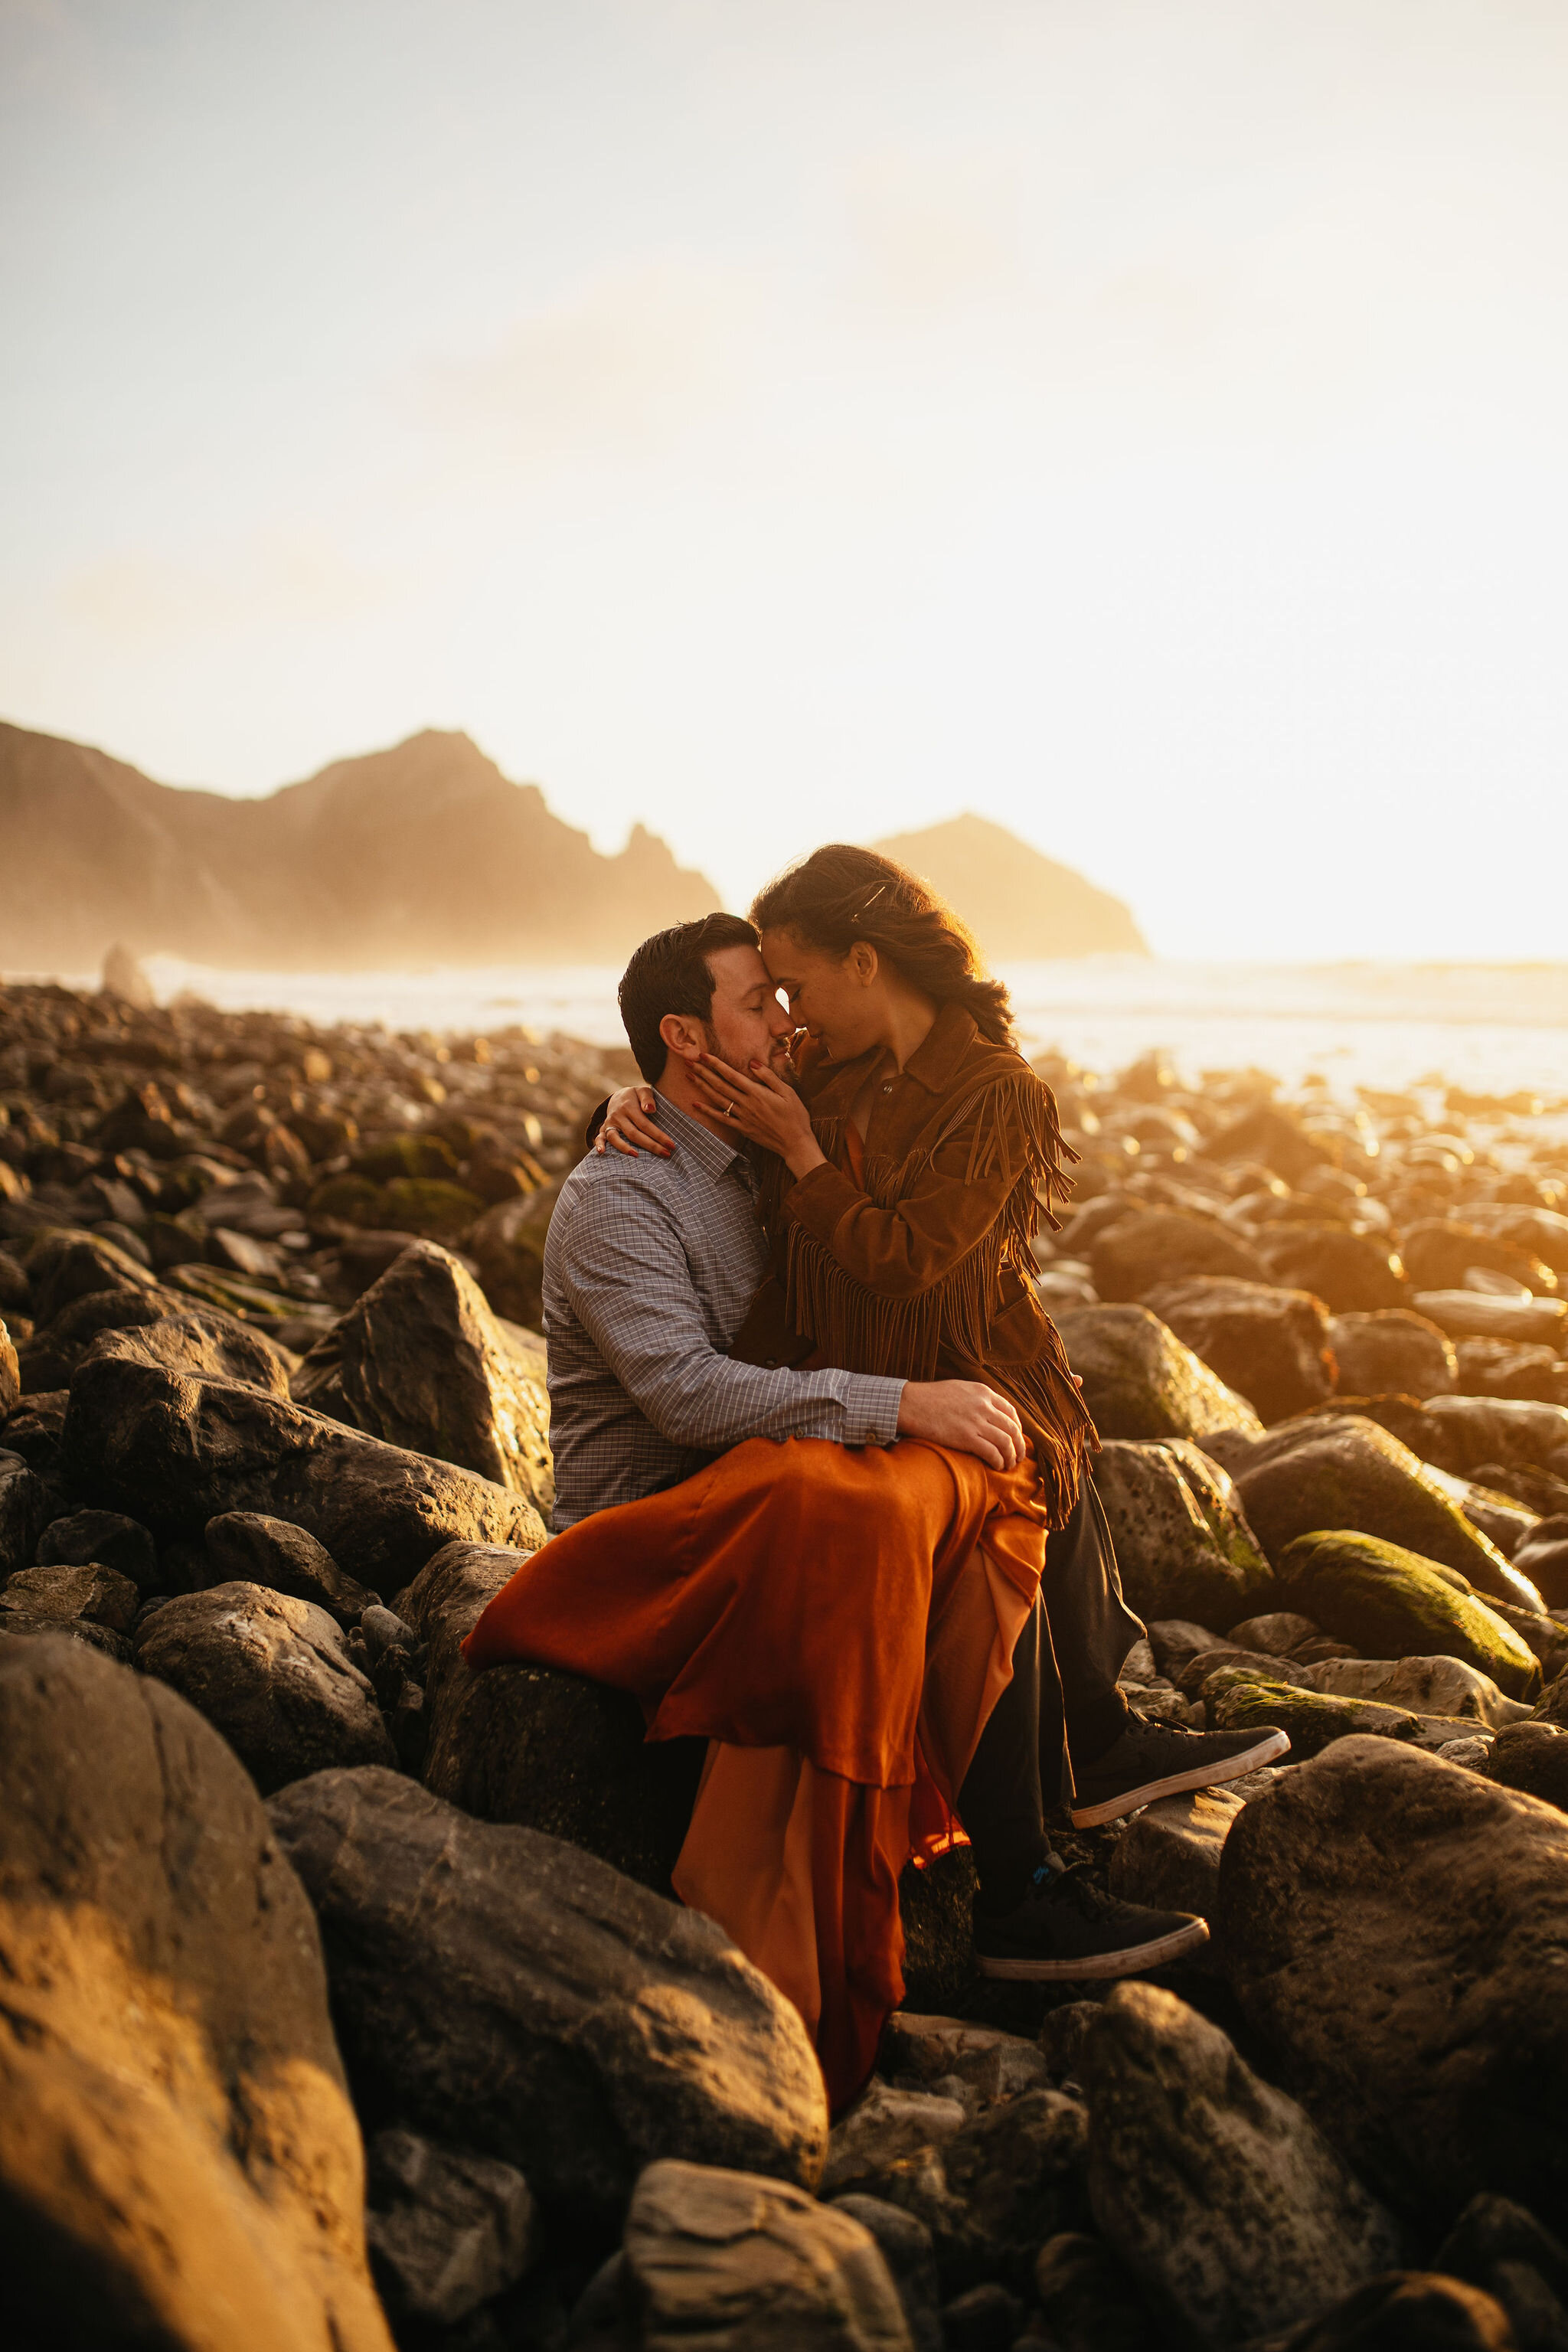 Big Sur is a beautiful place for your engagement photos!